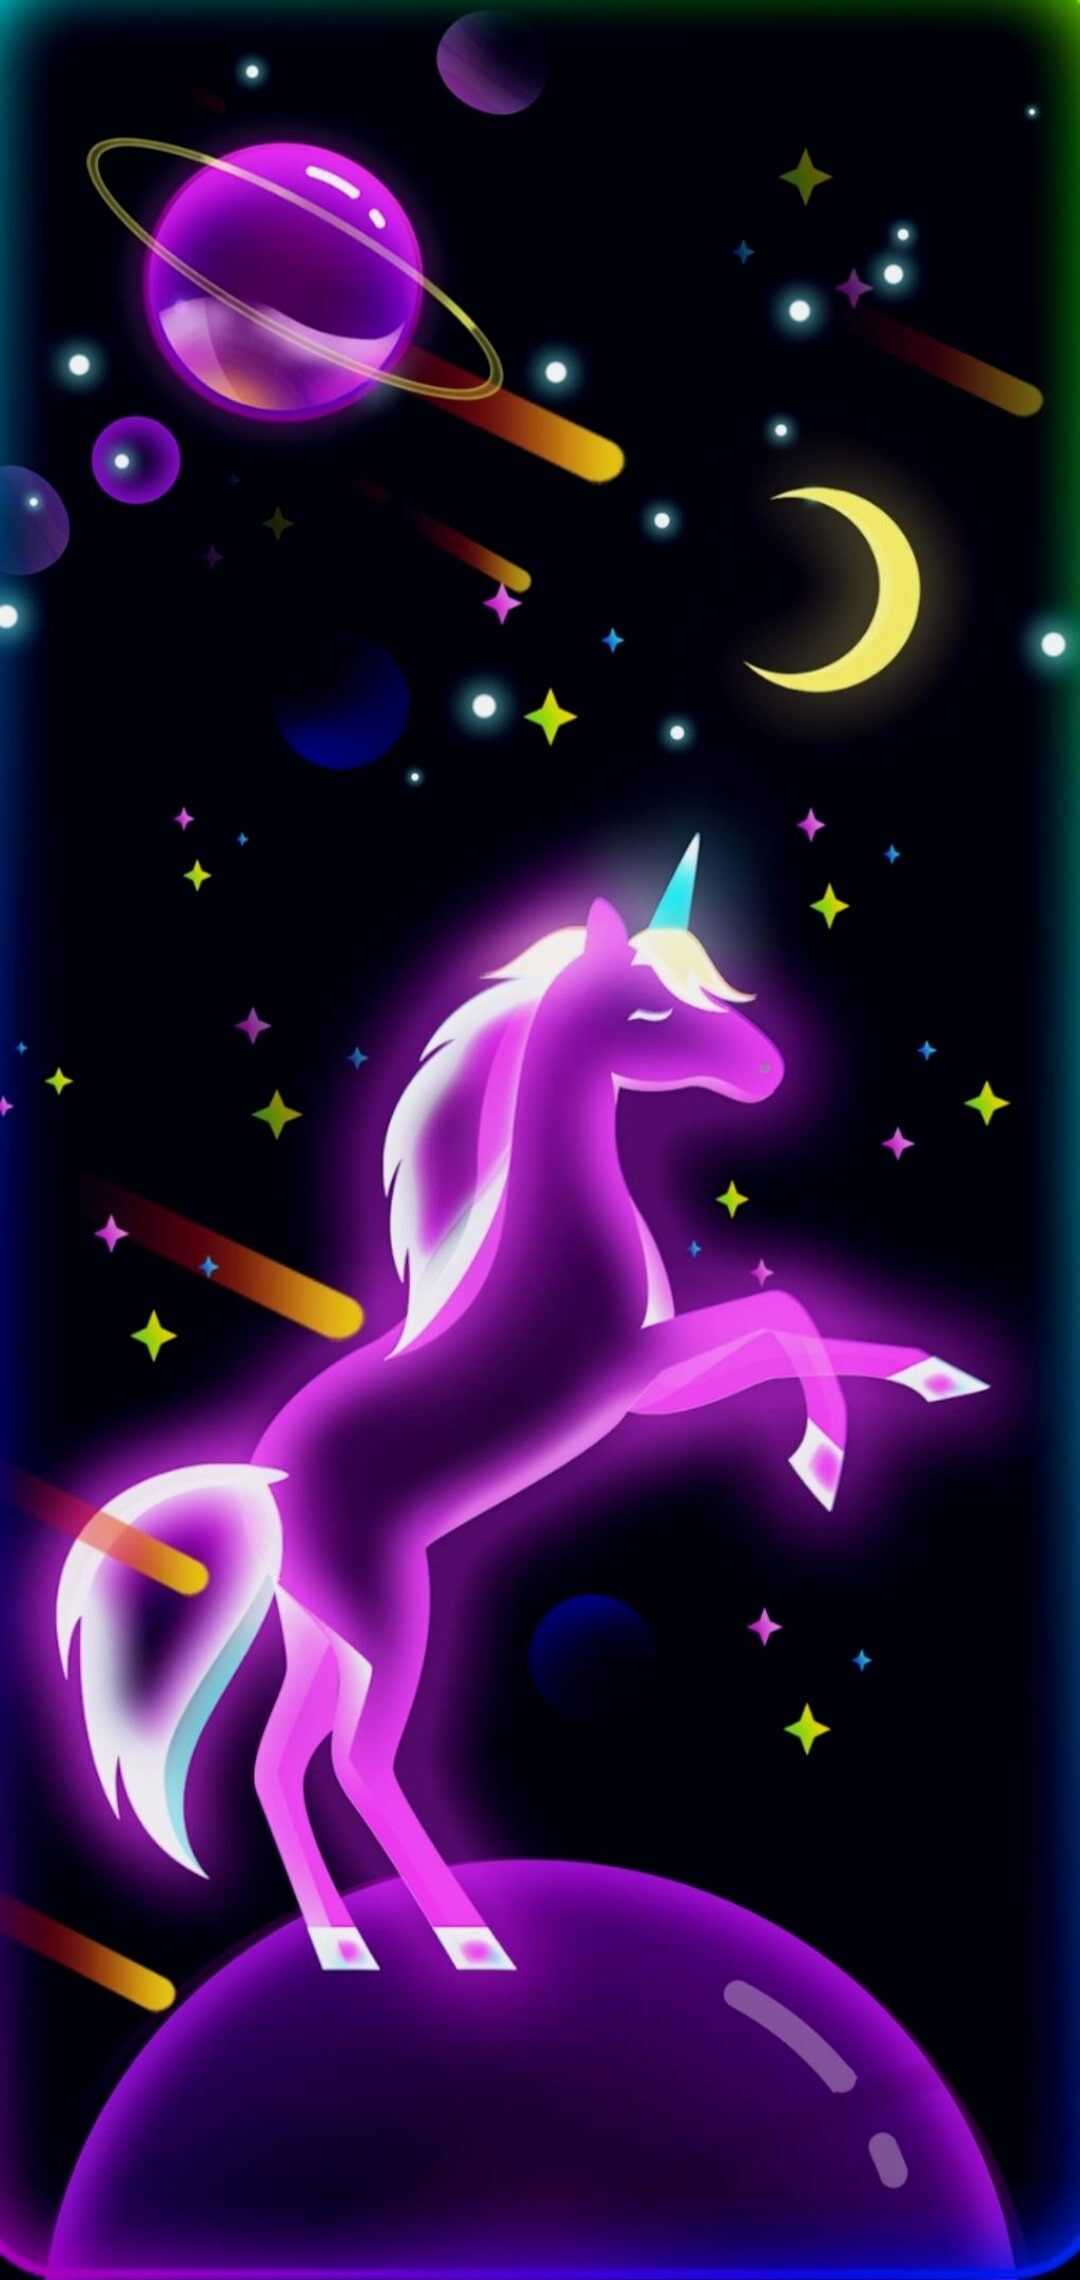 IPhone Wallpaper Unicorn with high-resolution 1080x1920 pixel. You can use this wallpaper for your iPhone 5, 6, 7, 8, X, XS, XR backgrounds, Mobile Screensaver, or iPad Lock Screen - Unicorn